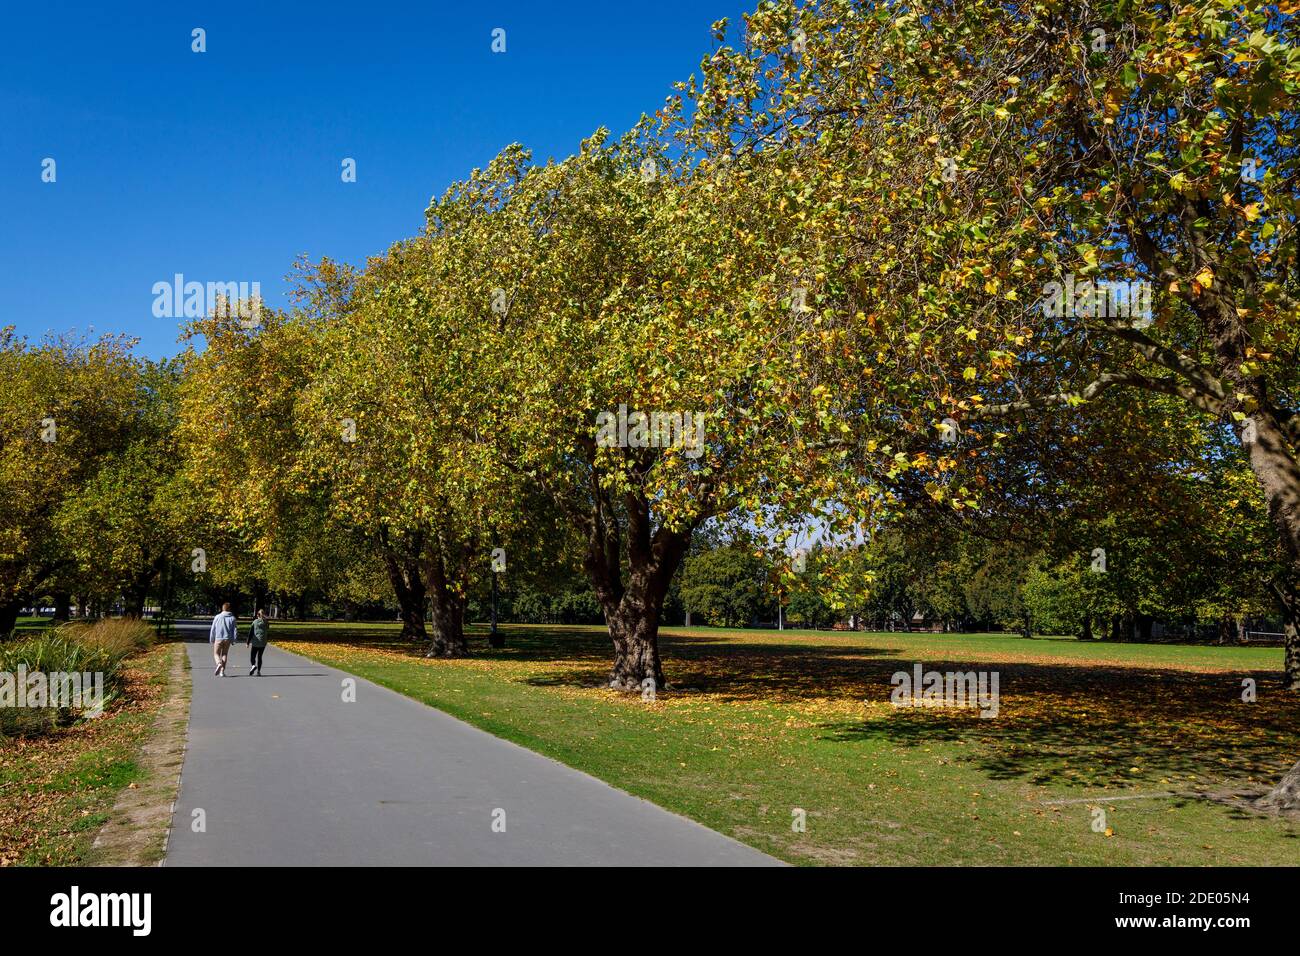 Hagley Park, Christchurch, New Zealand. A couple walking along the footpath beside the autumnal leafed trees. Stock Photo